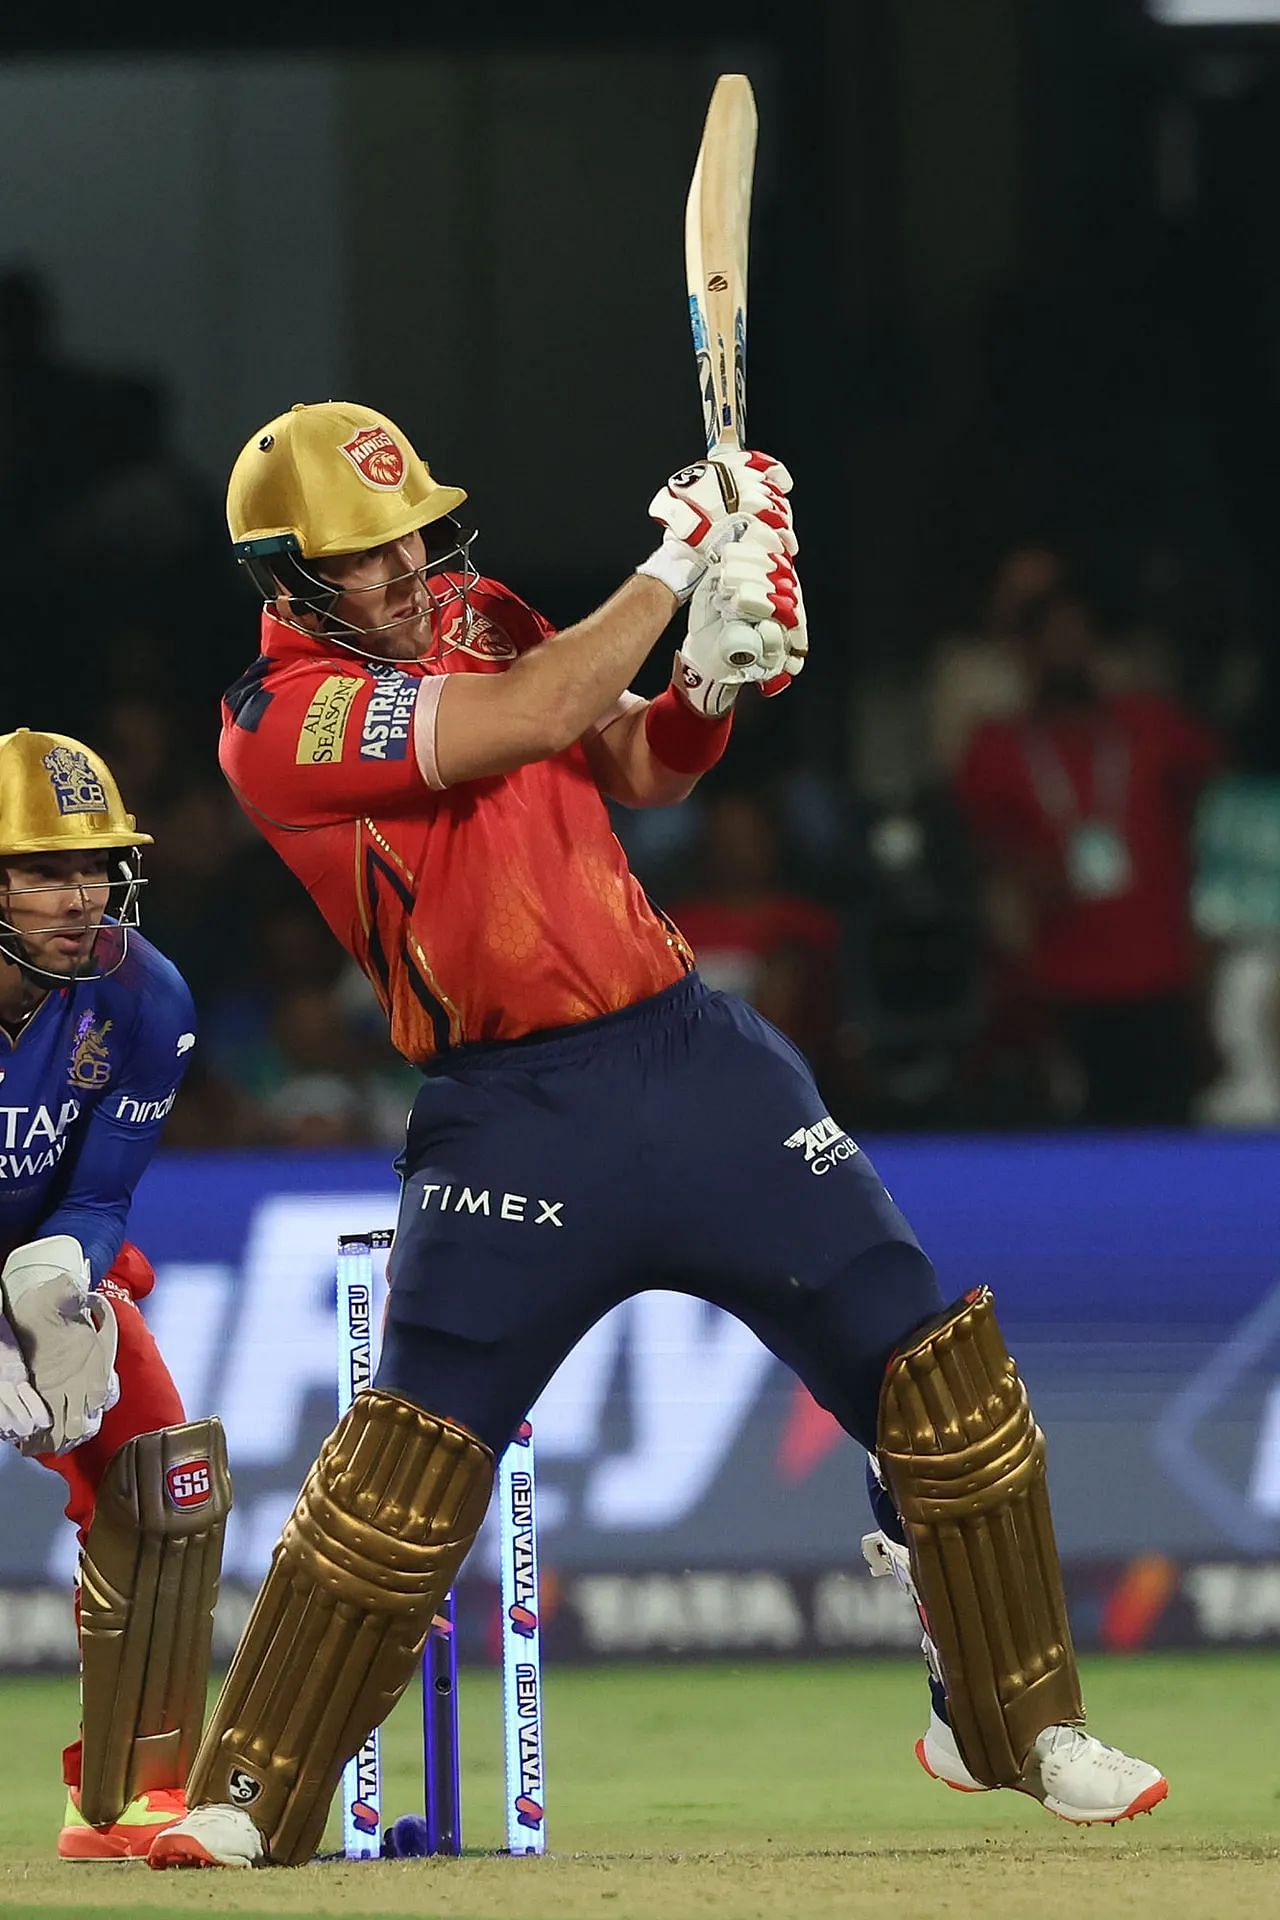 Liam Livingstone in action (Credits: IPL)